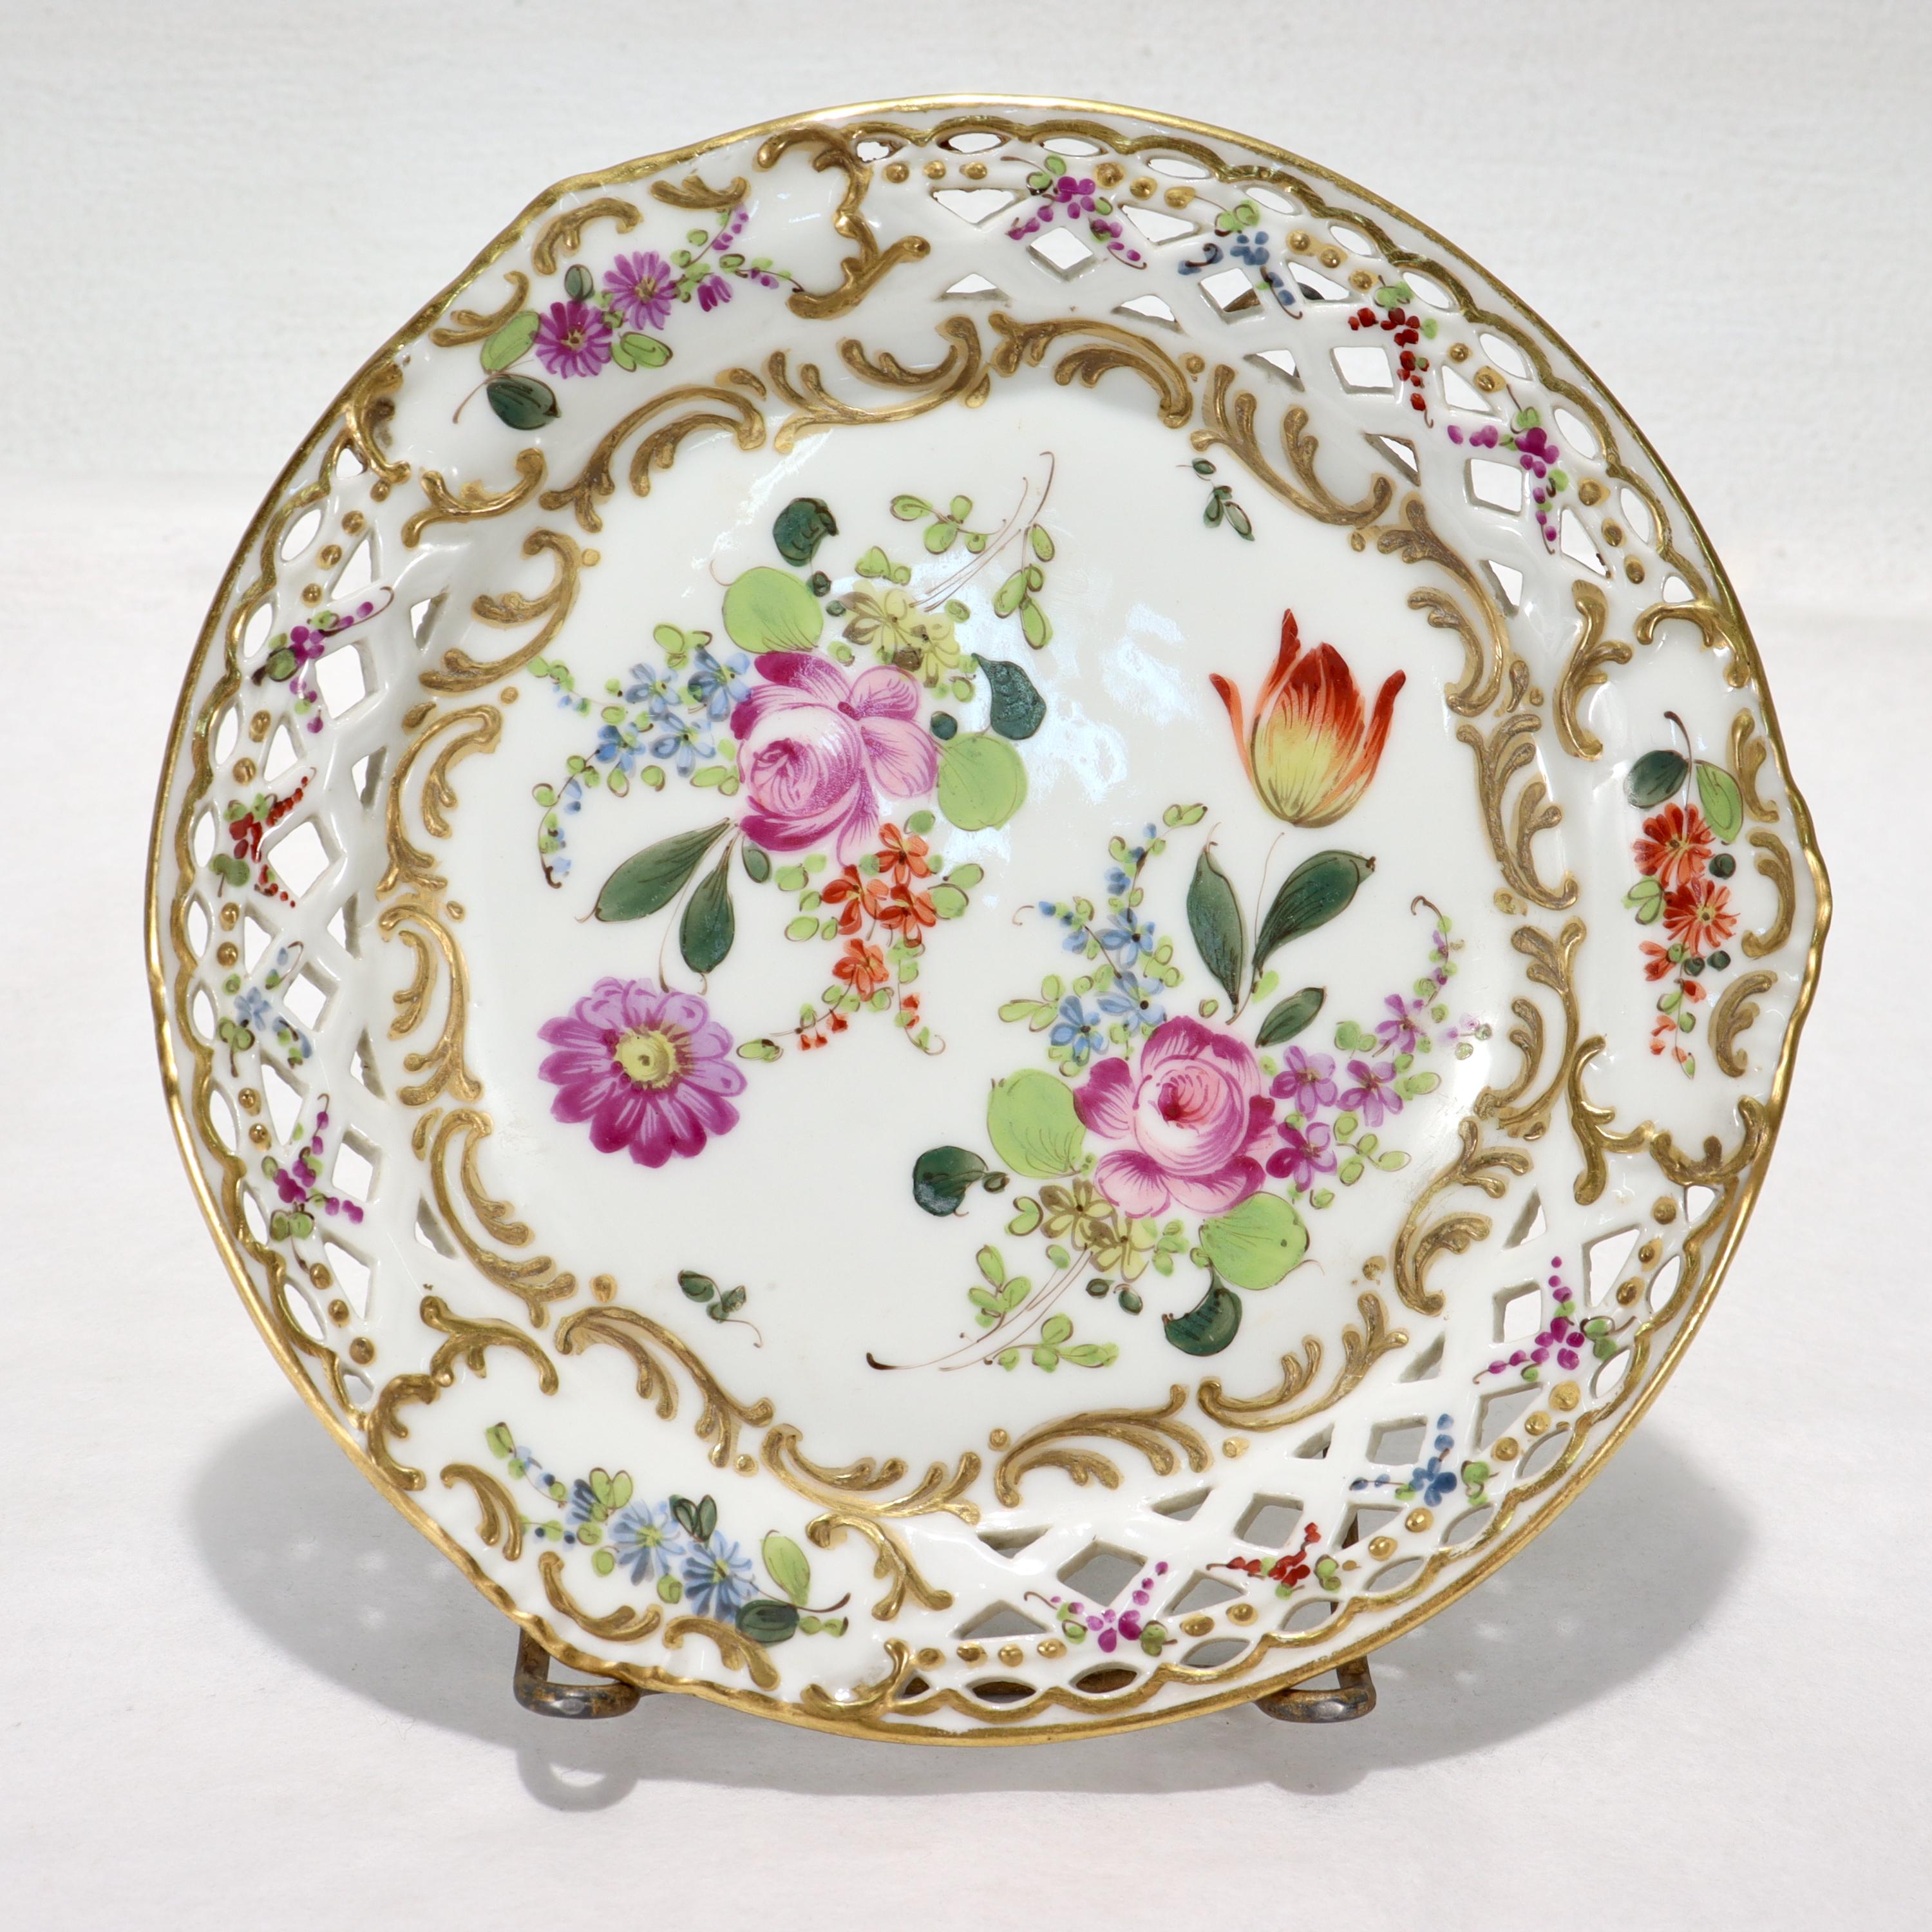 6 Antique French Bloch & Bourdois Reticulated Dresden Style Porcelain Plates For Sale 2